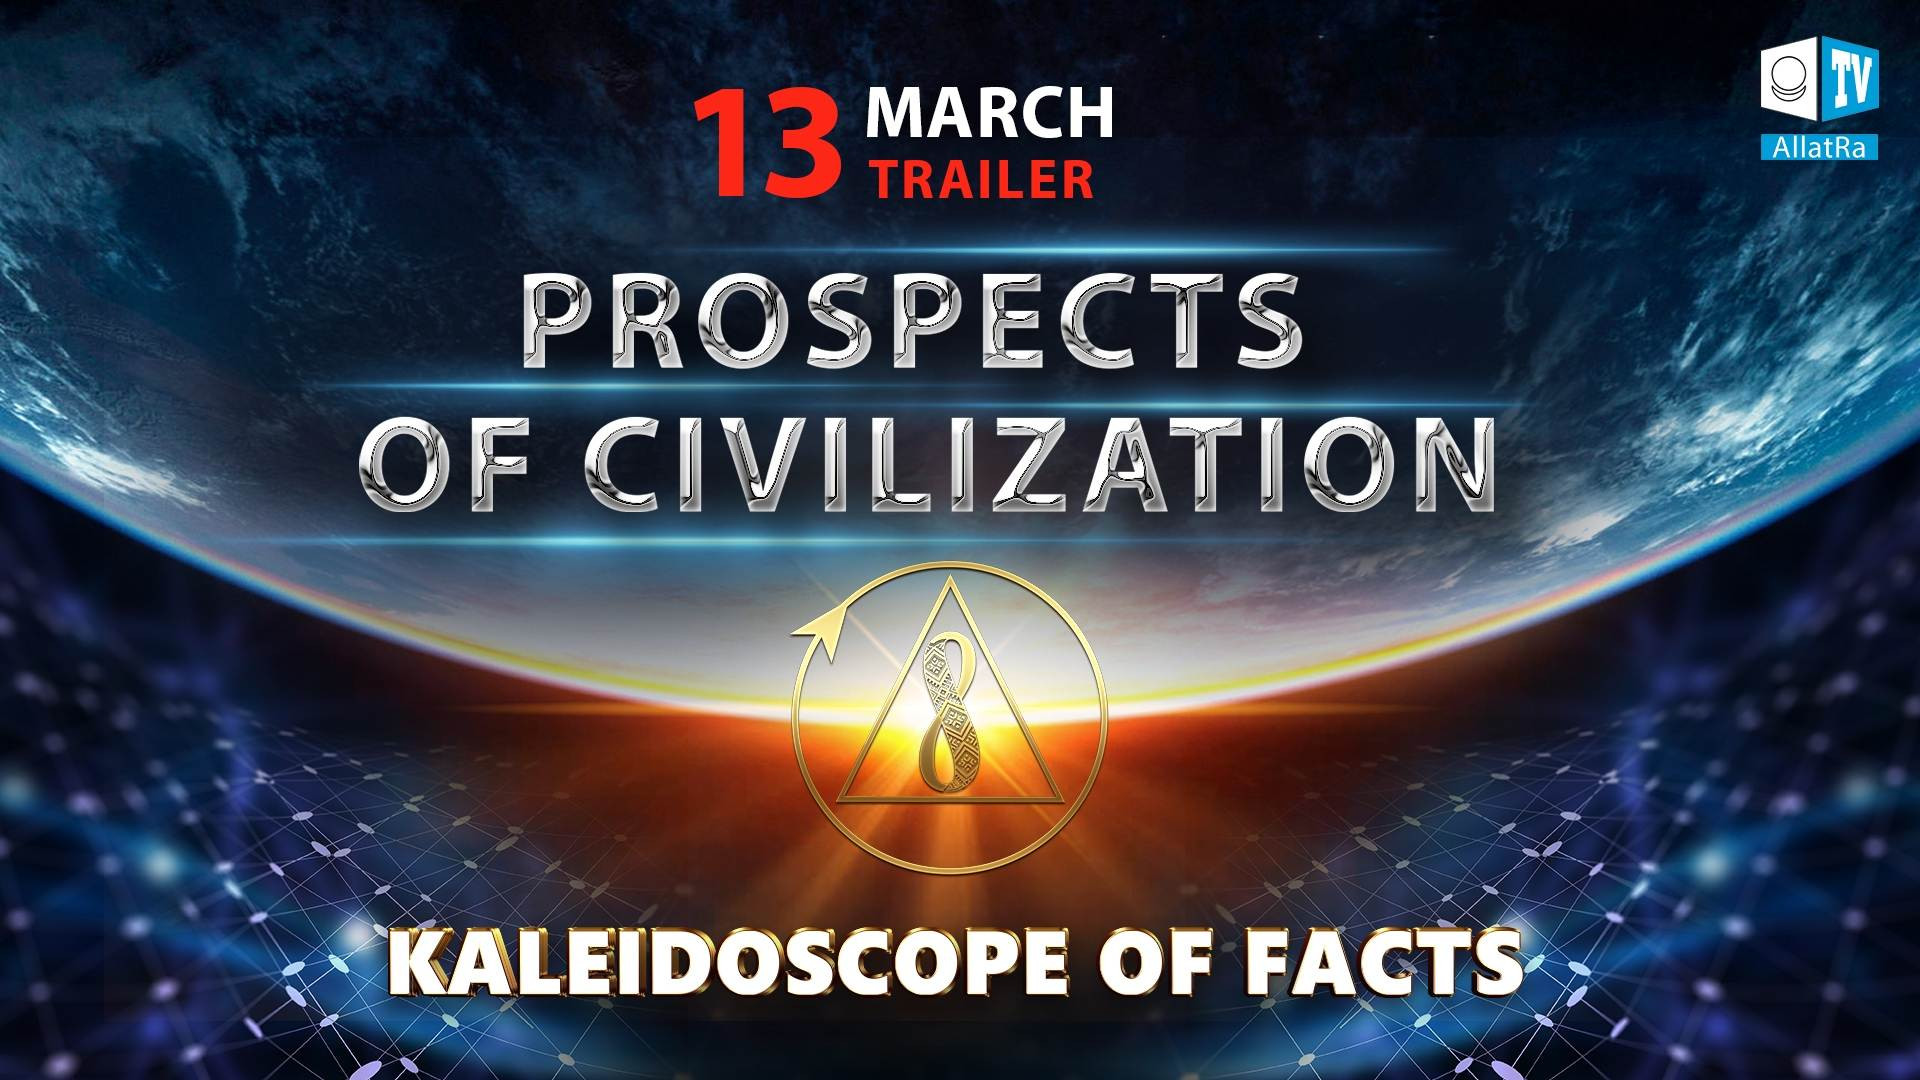 Prospects of Civilization. Trailer | Kaleidoscope of Facts 8